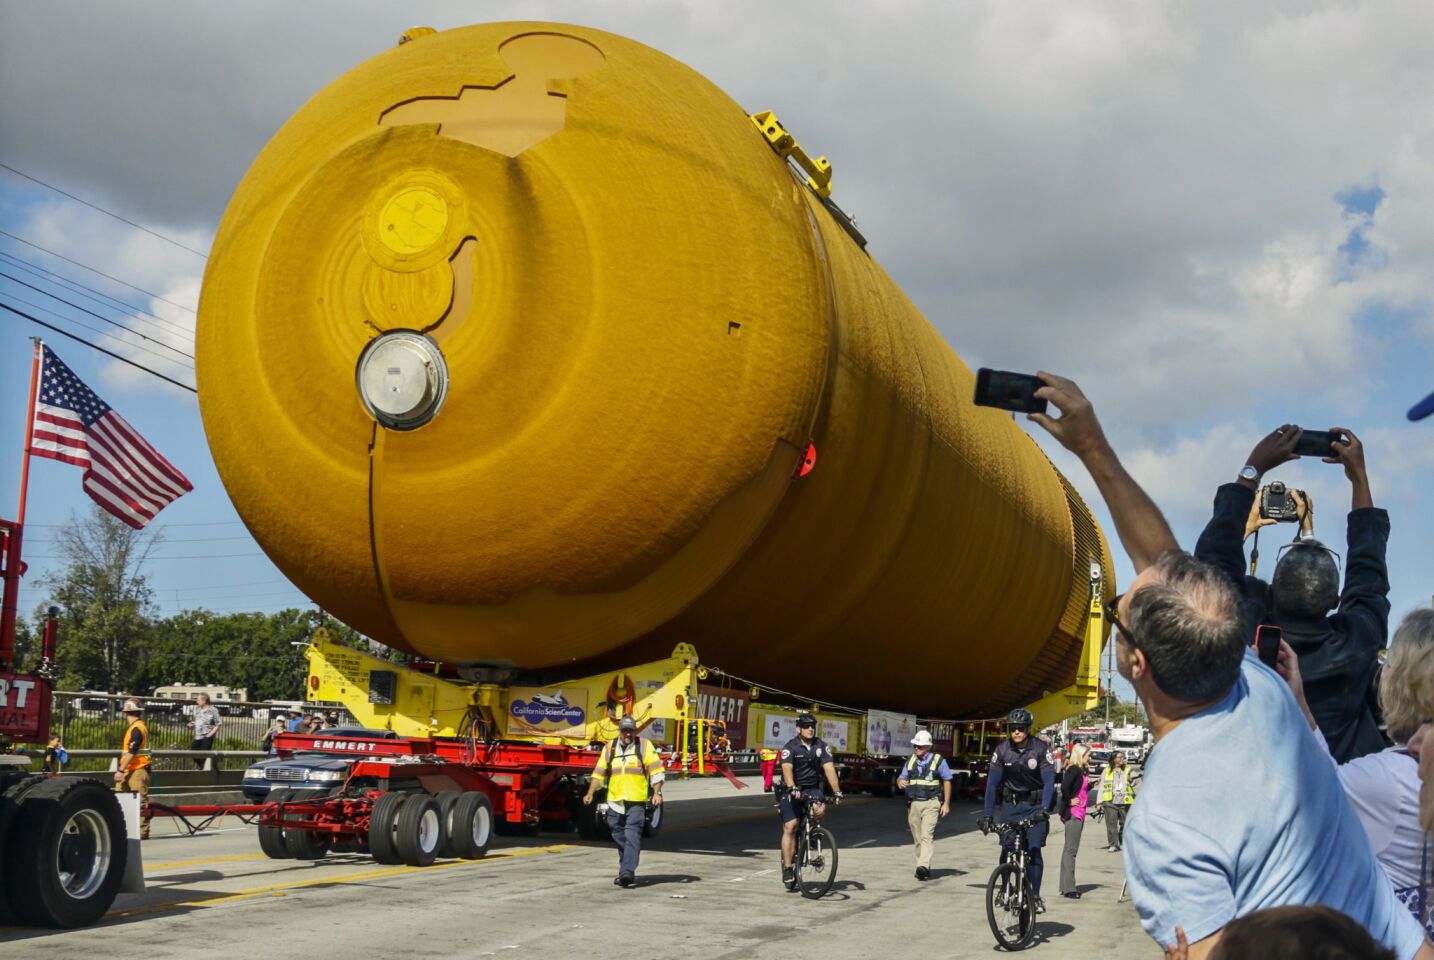 ET-94, NASA's last remaining space shuttle external tank, travels along Arbor Vitae Street in Inglewood on its way to the California Science Center.